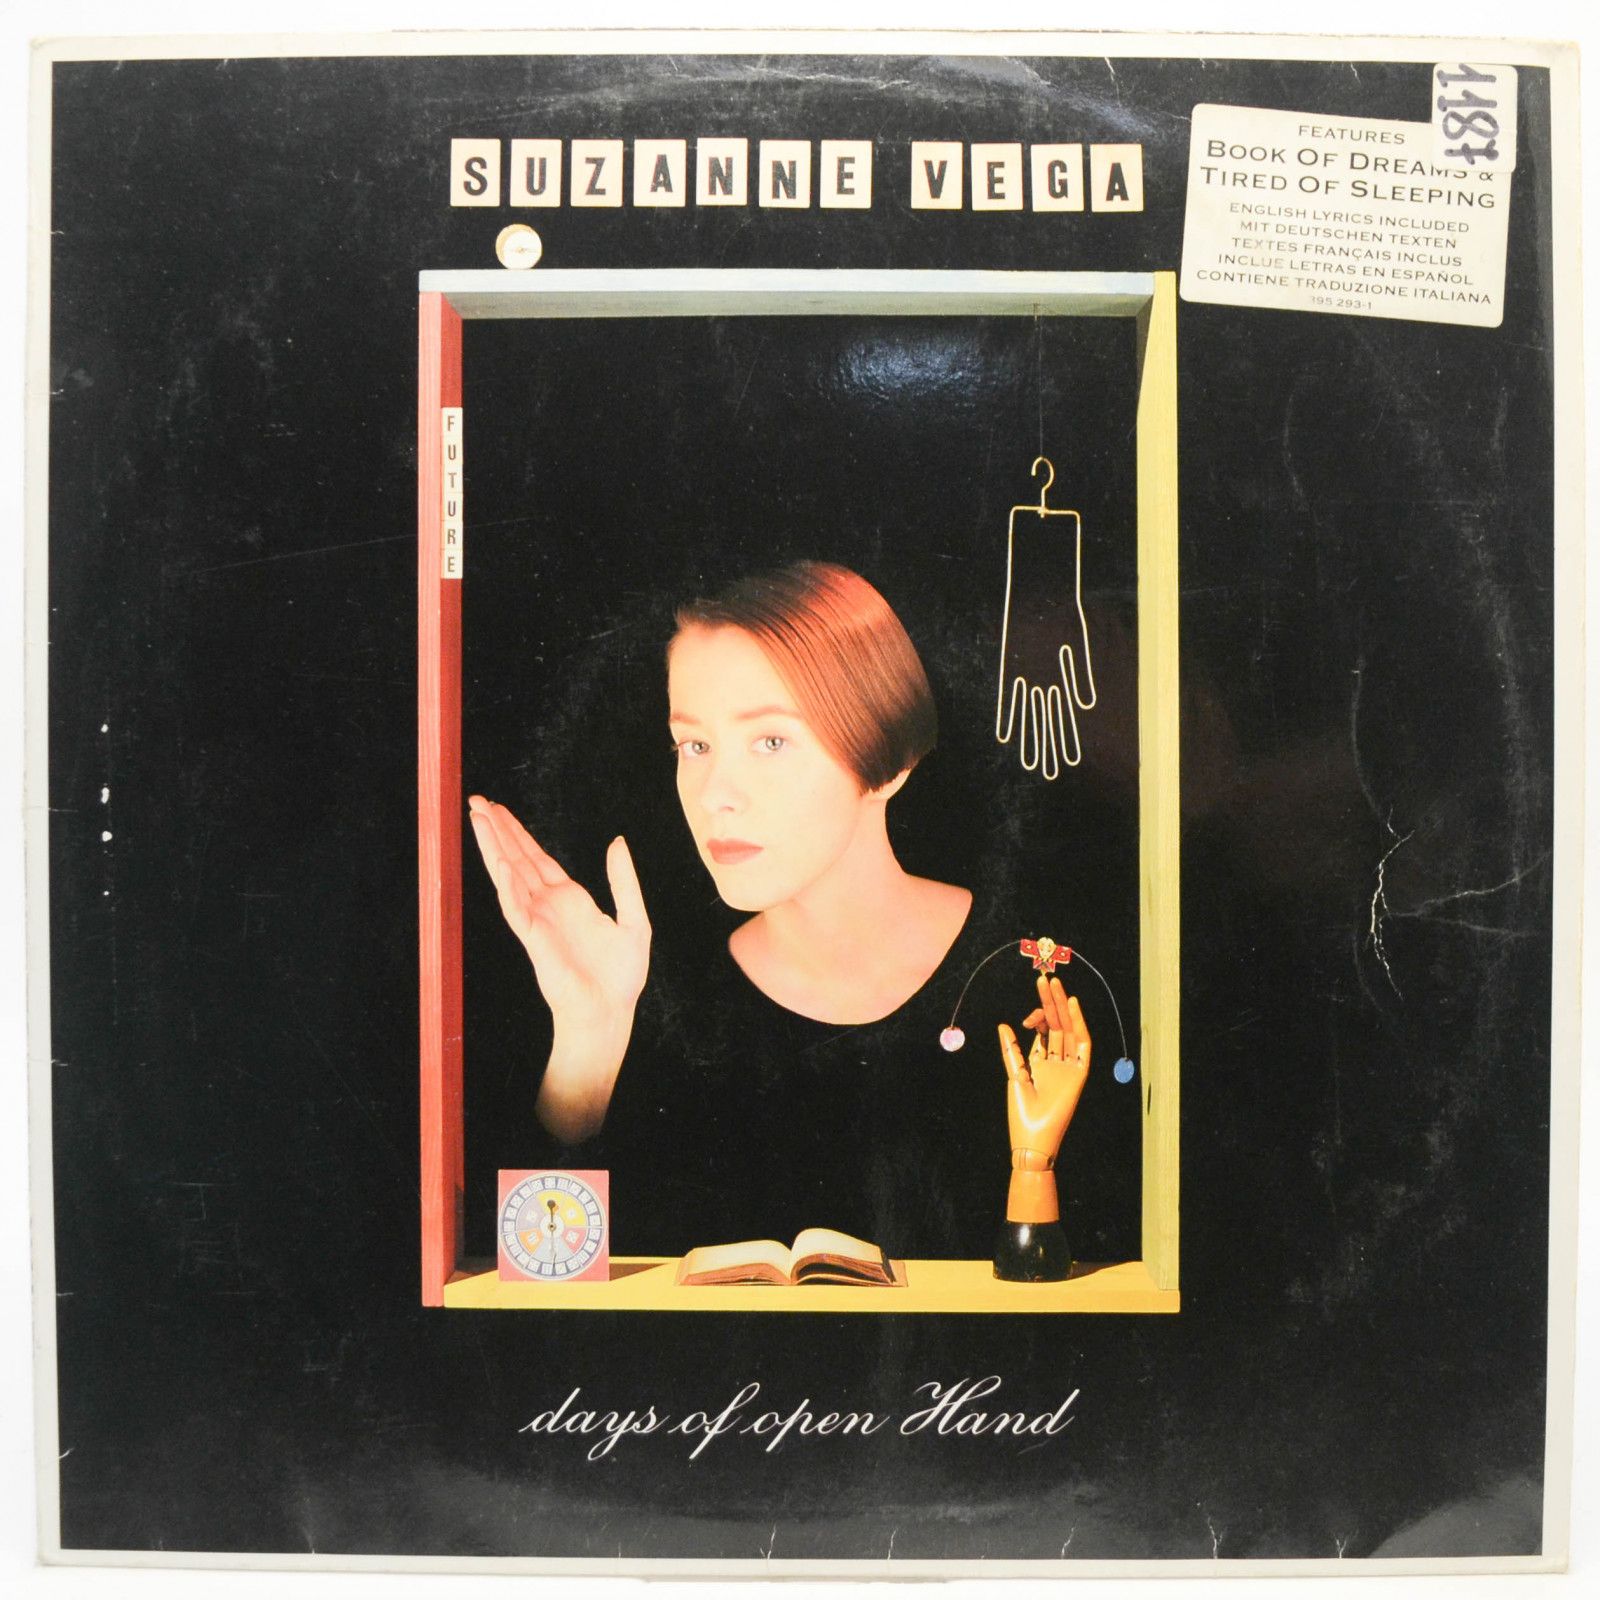 Suzanne Vega — Days Of Open Hand, 1990